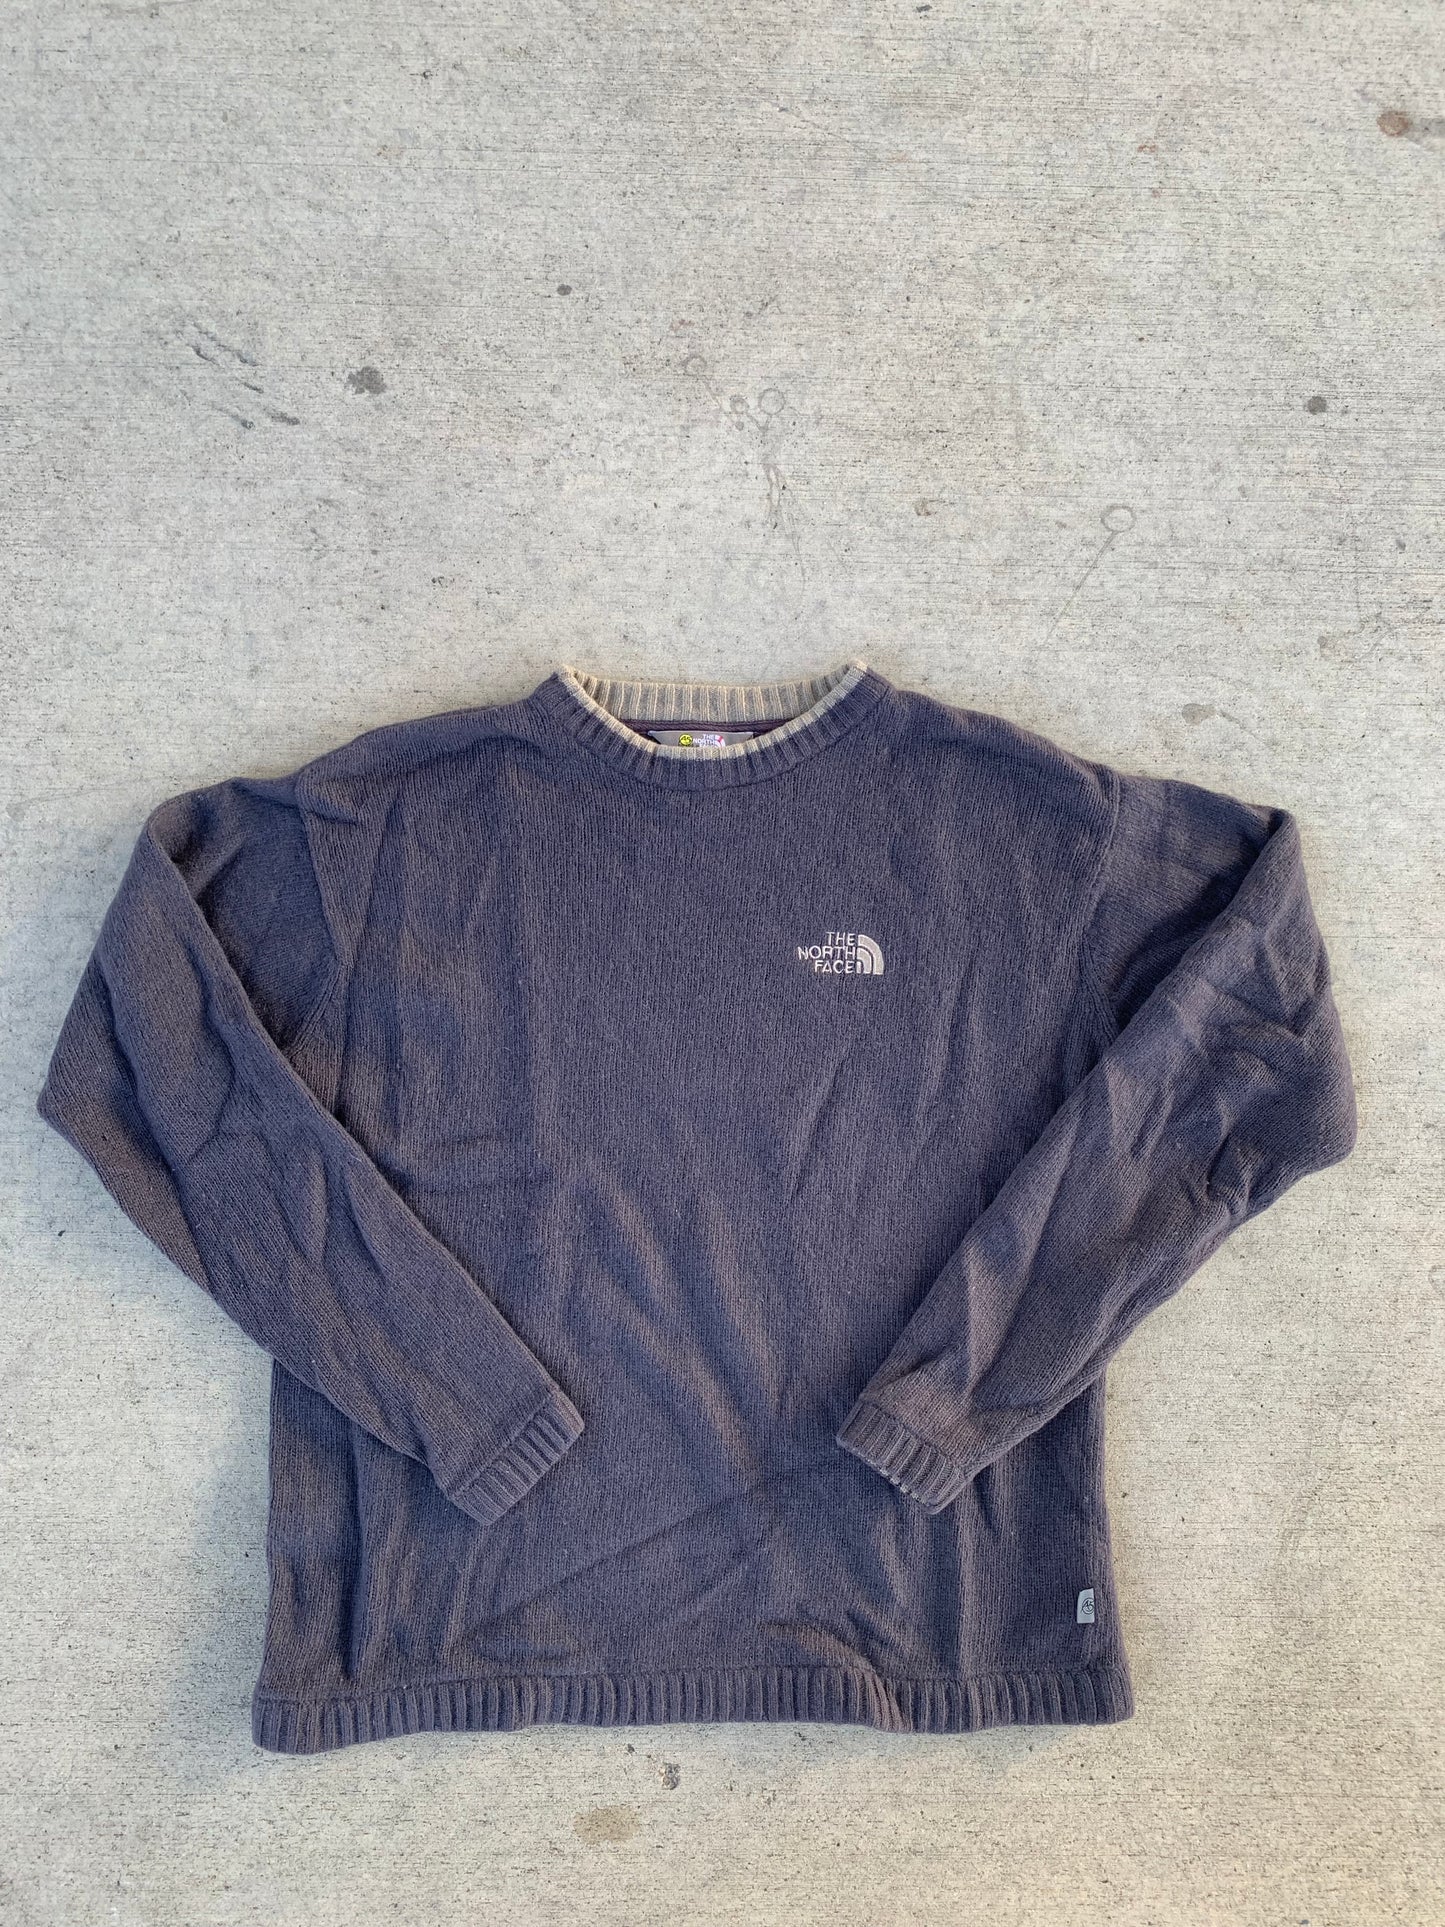 Gray North Face Sweater